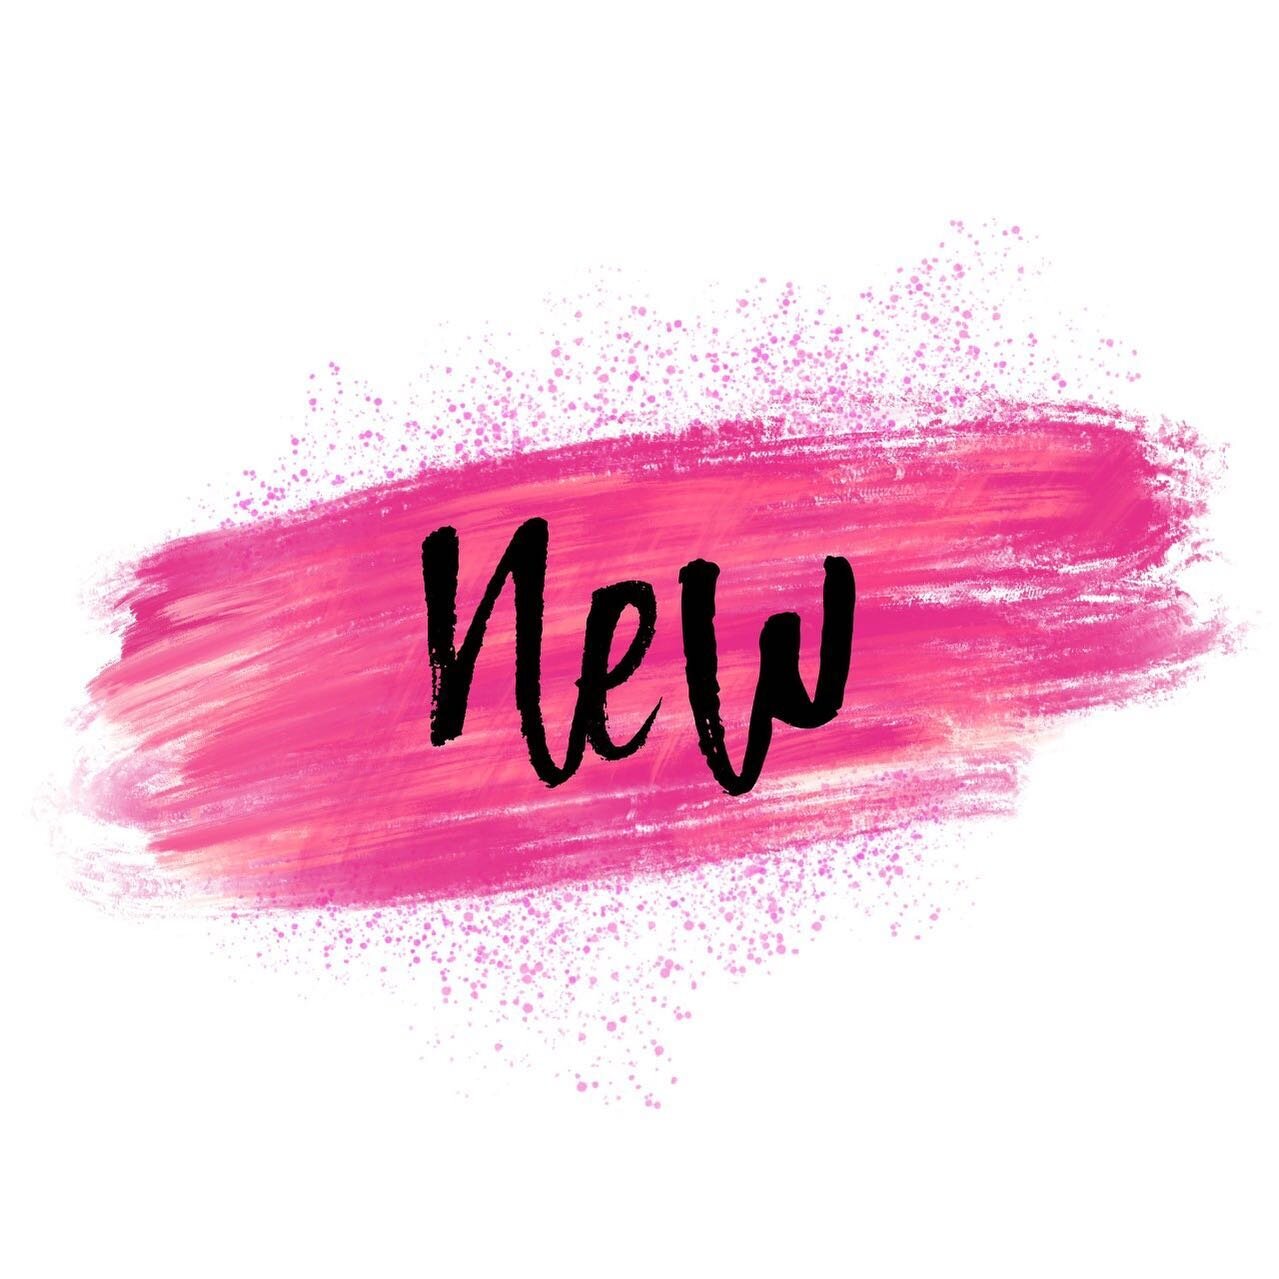 NEW WORK being released this week!! 💕✨Yay!! Keep your eyes peeled! 
.
.
#ashebickillustrations #artinthemaking #artist #illustrator #illustrationartists